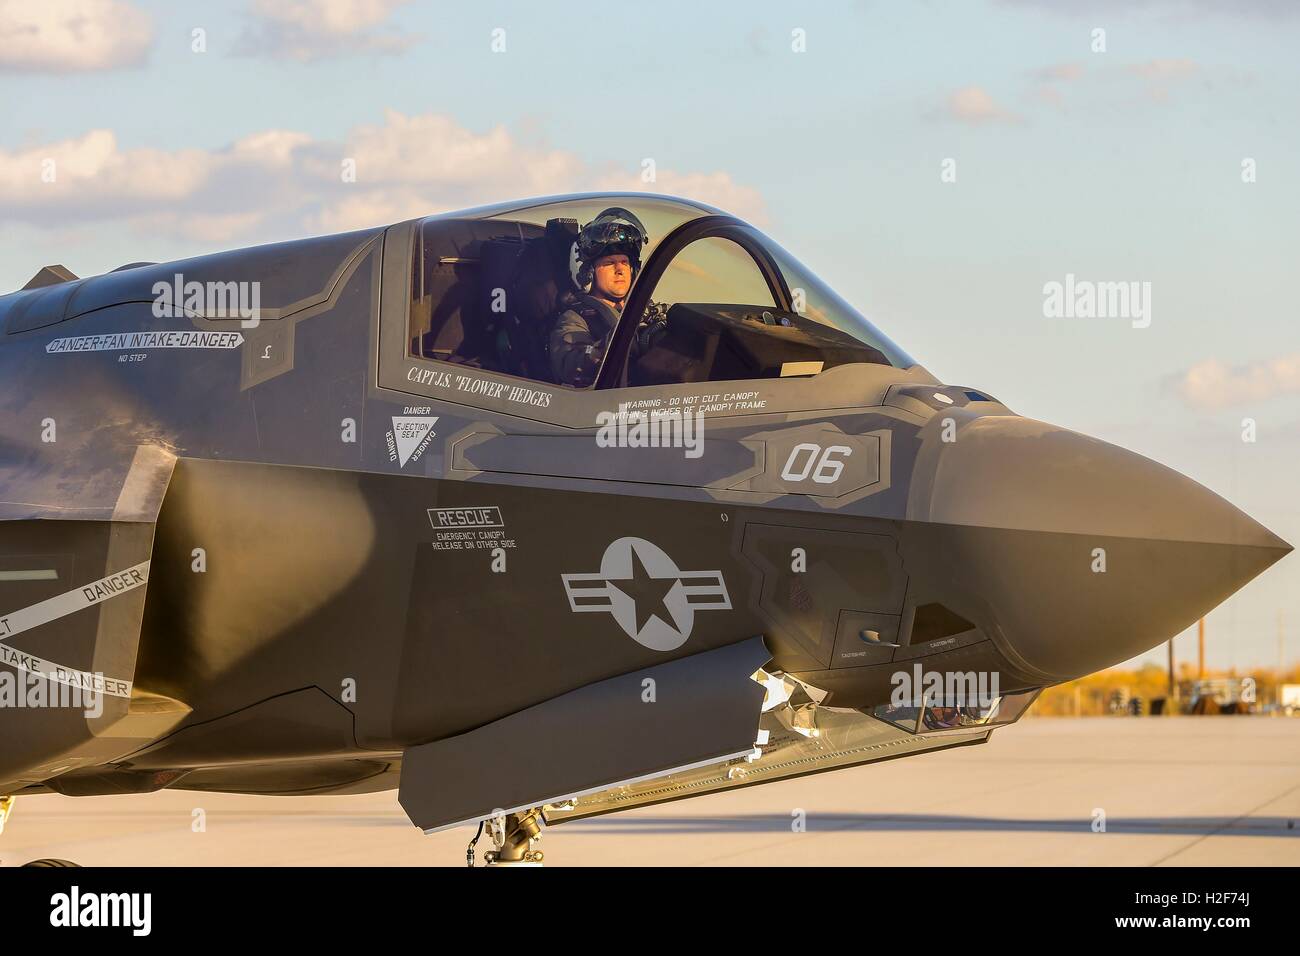 U.S. Marines prepare for takeoff in F-35 stealth fighter aircraft during a WTI 1-17 training event at the Marine Corps Air Station September 22, 2016 in Yuma, Arizona. Stock Photo